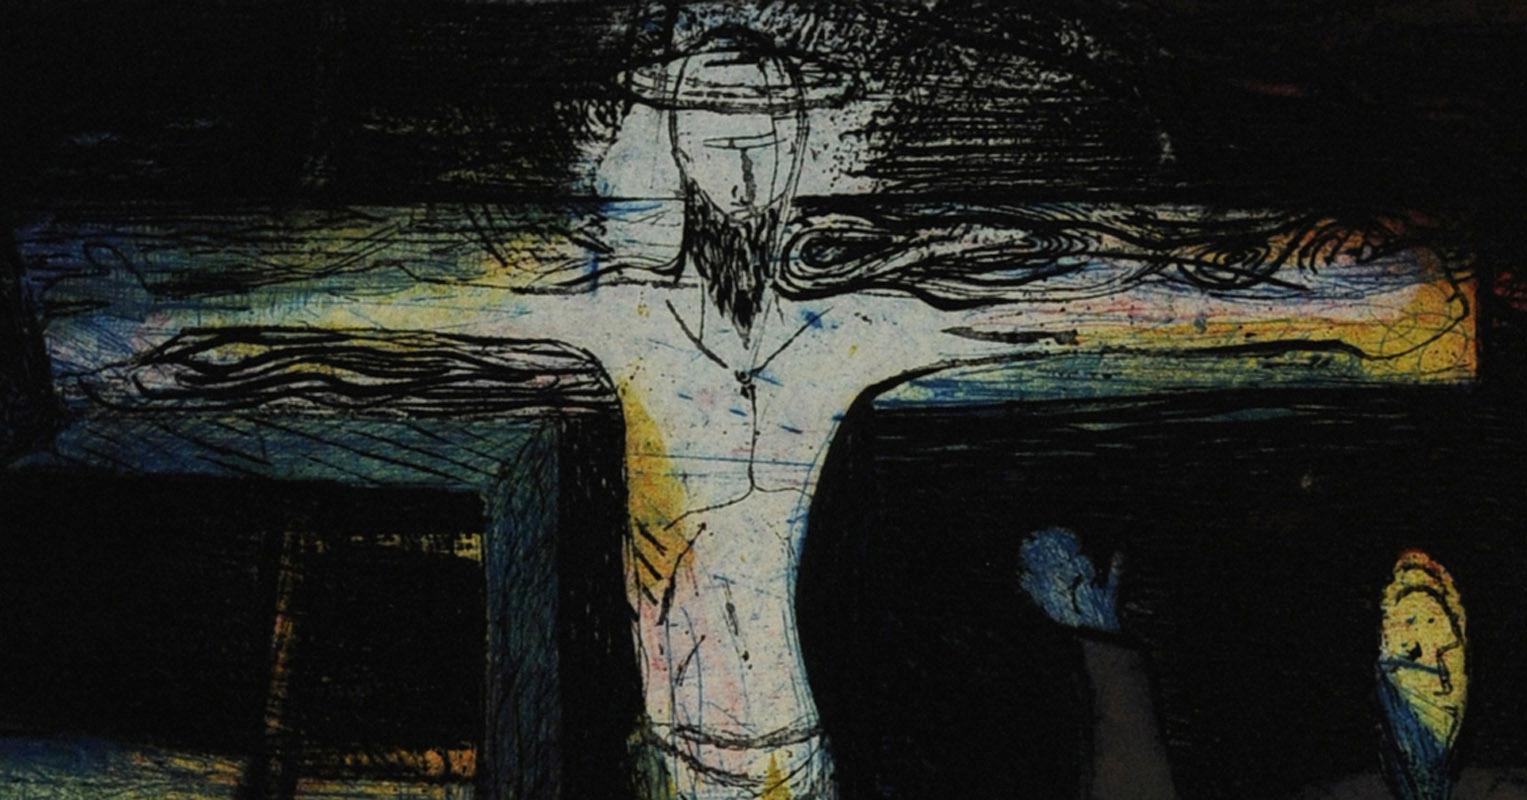 Crucifixion - Print by Ray H. French